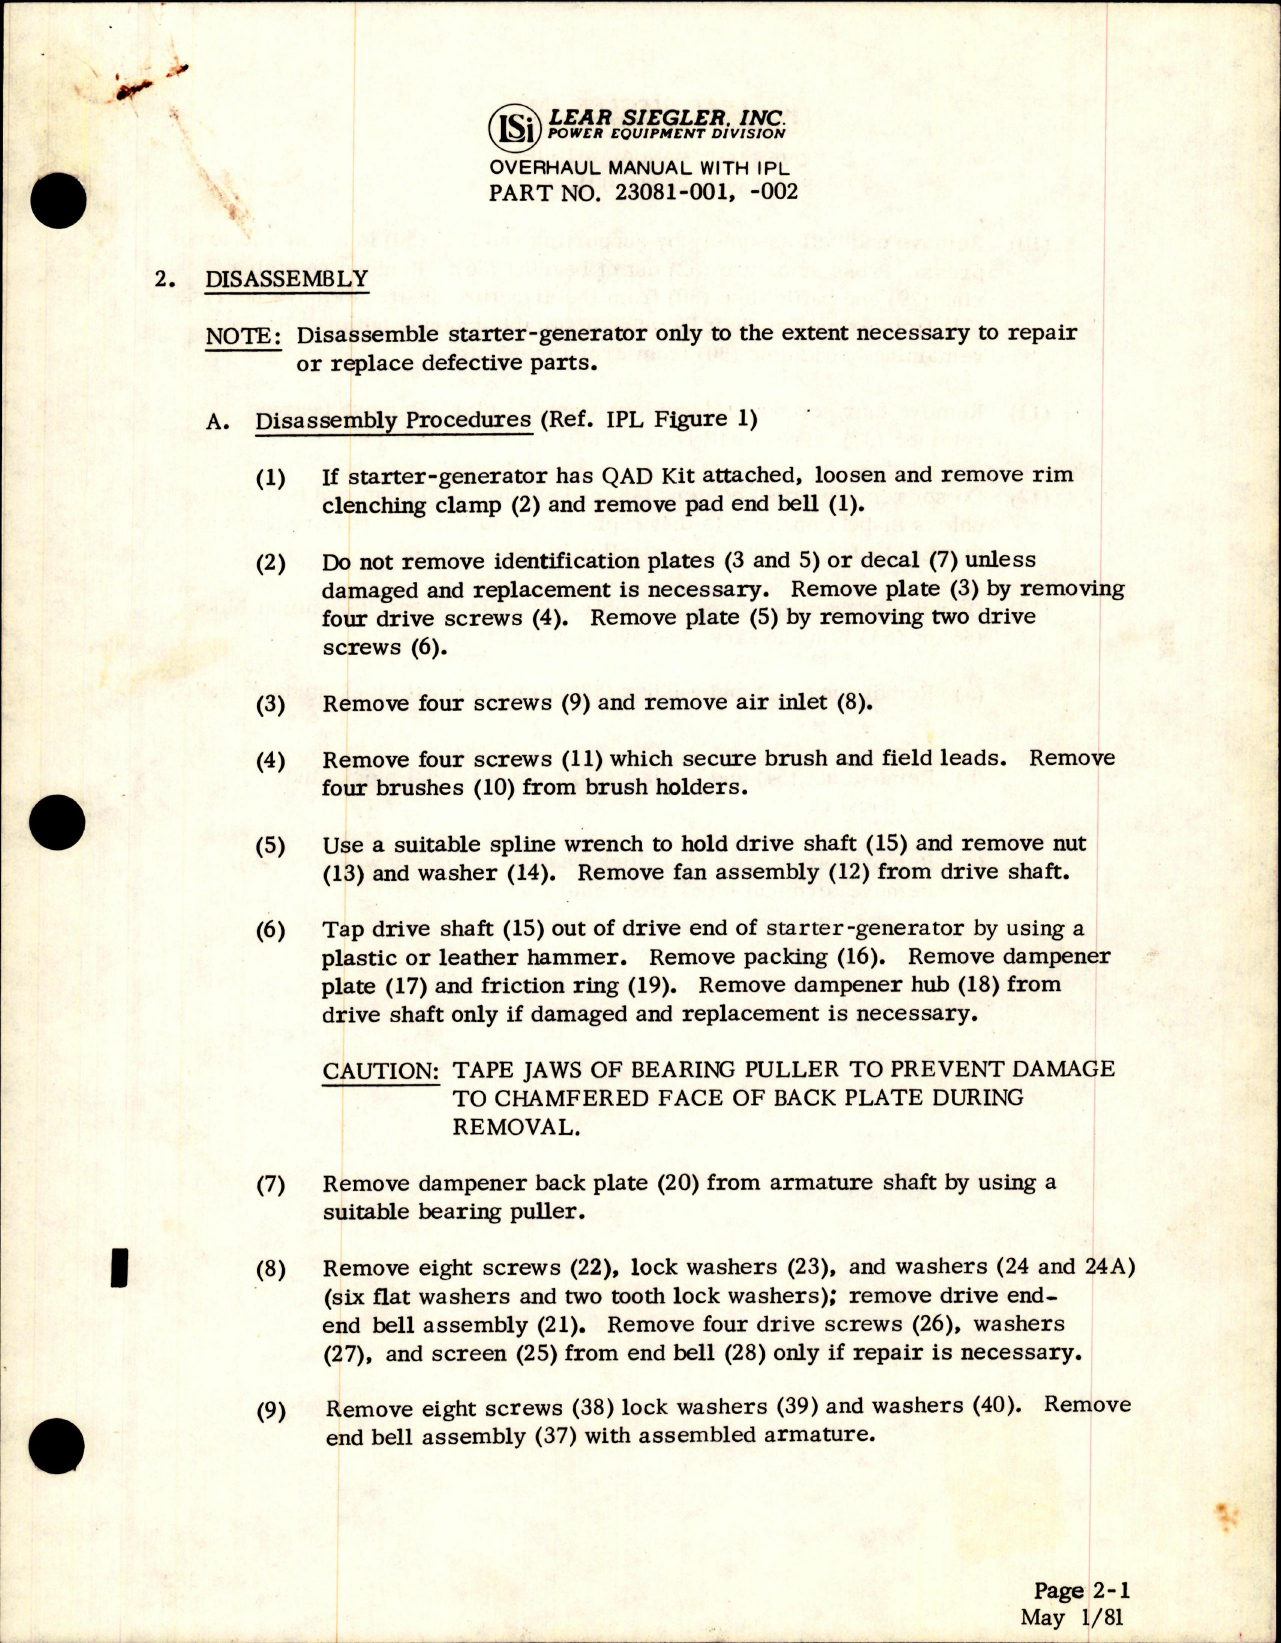 Sample page 7 from AirCorps Library document: Overhaul Manual with Illustrated Parts List for DC Starter Generator - Part 23080 Series